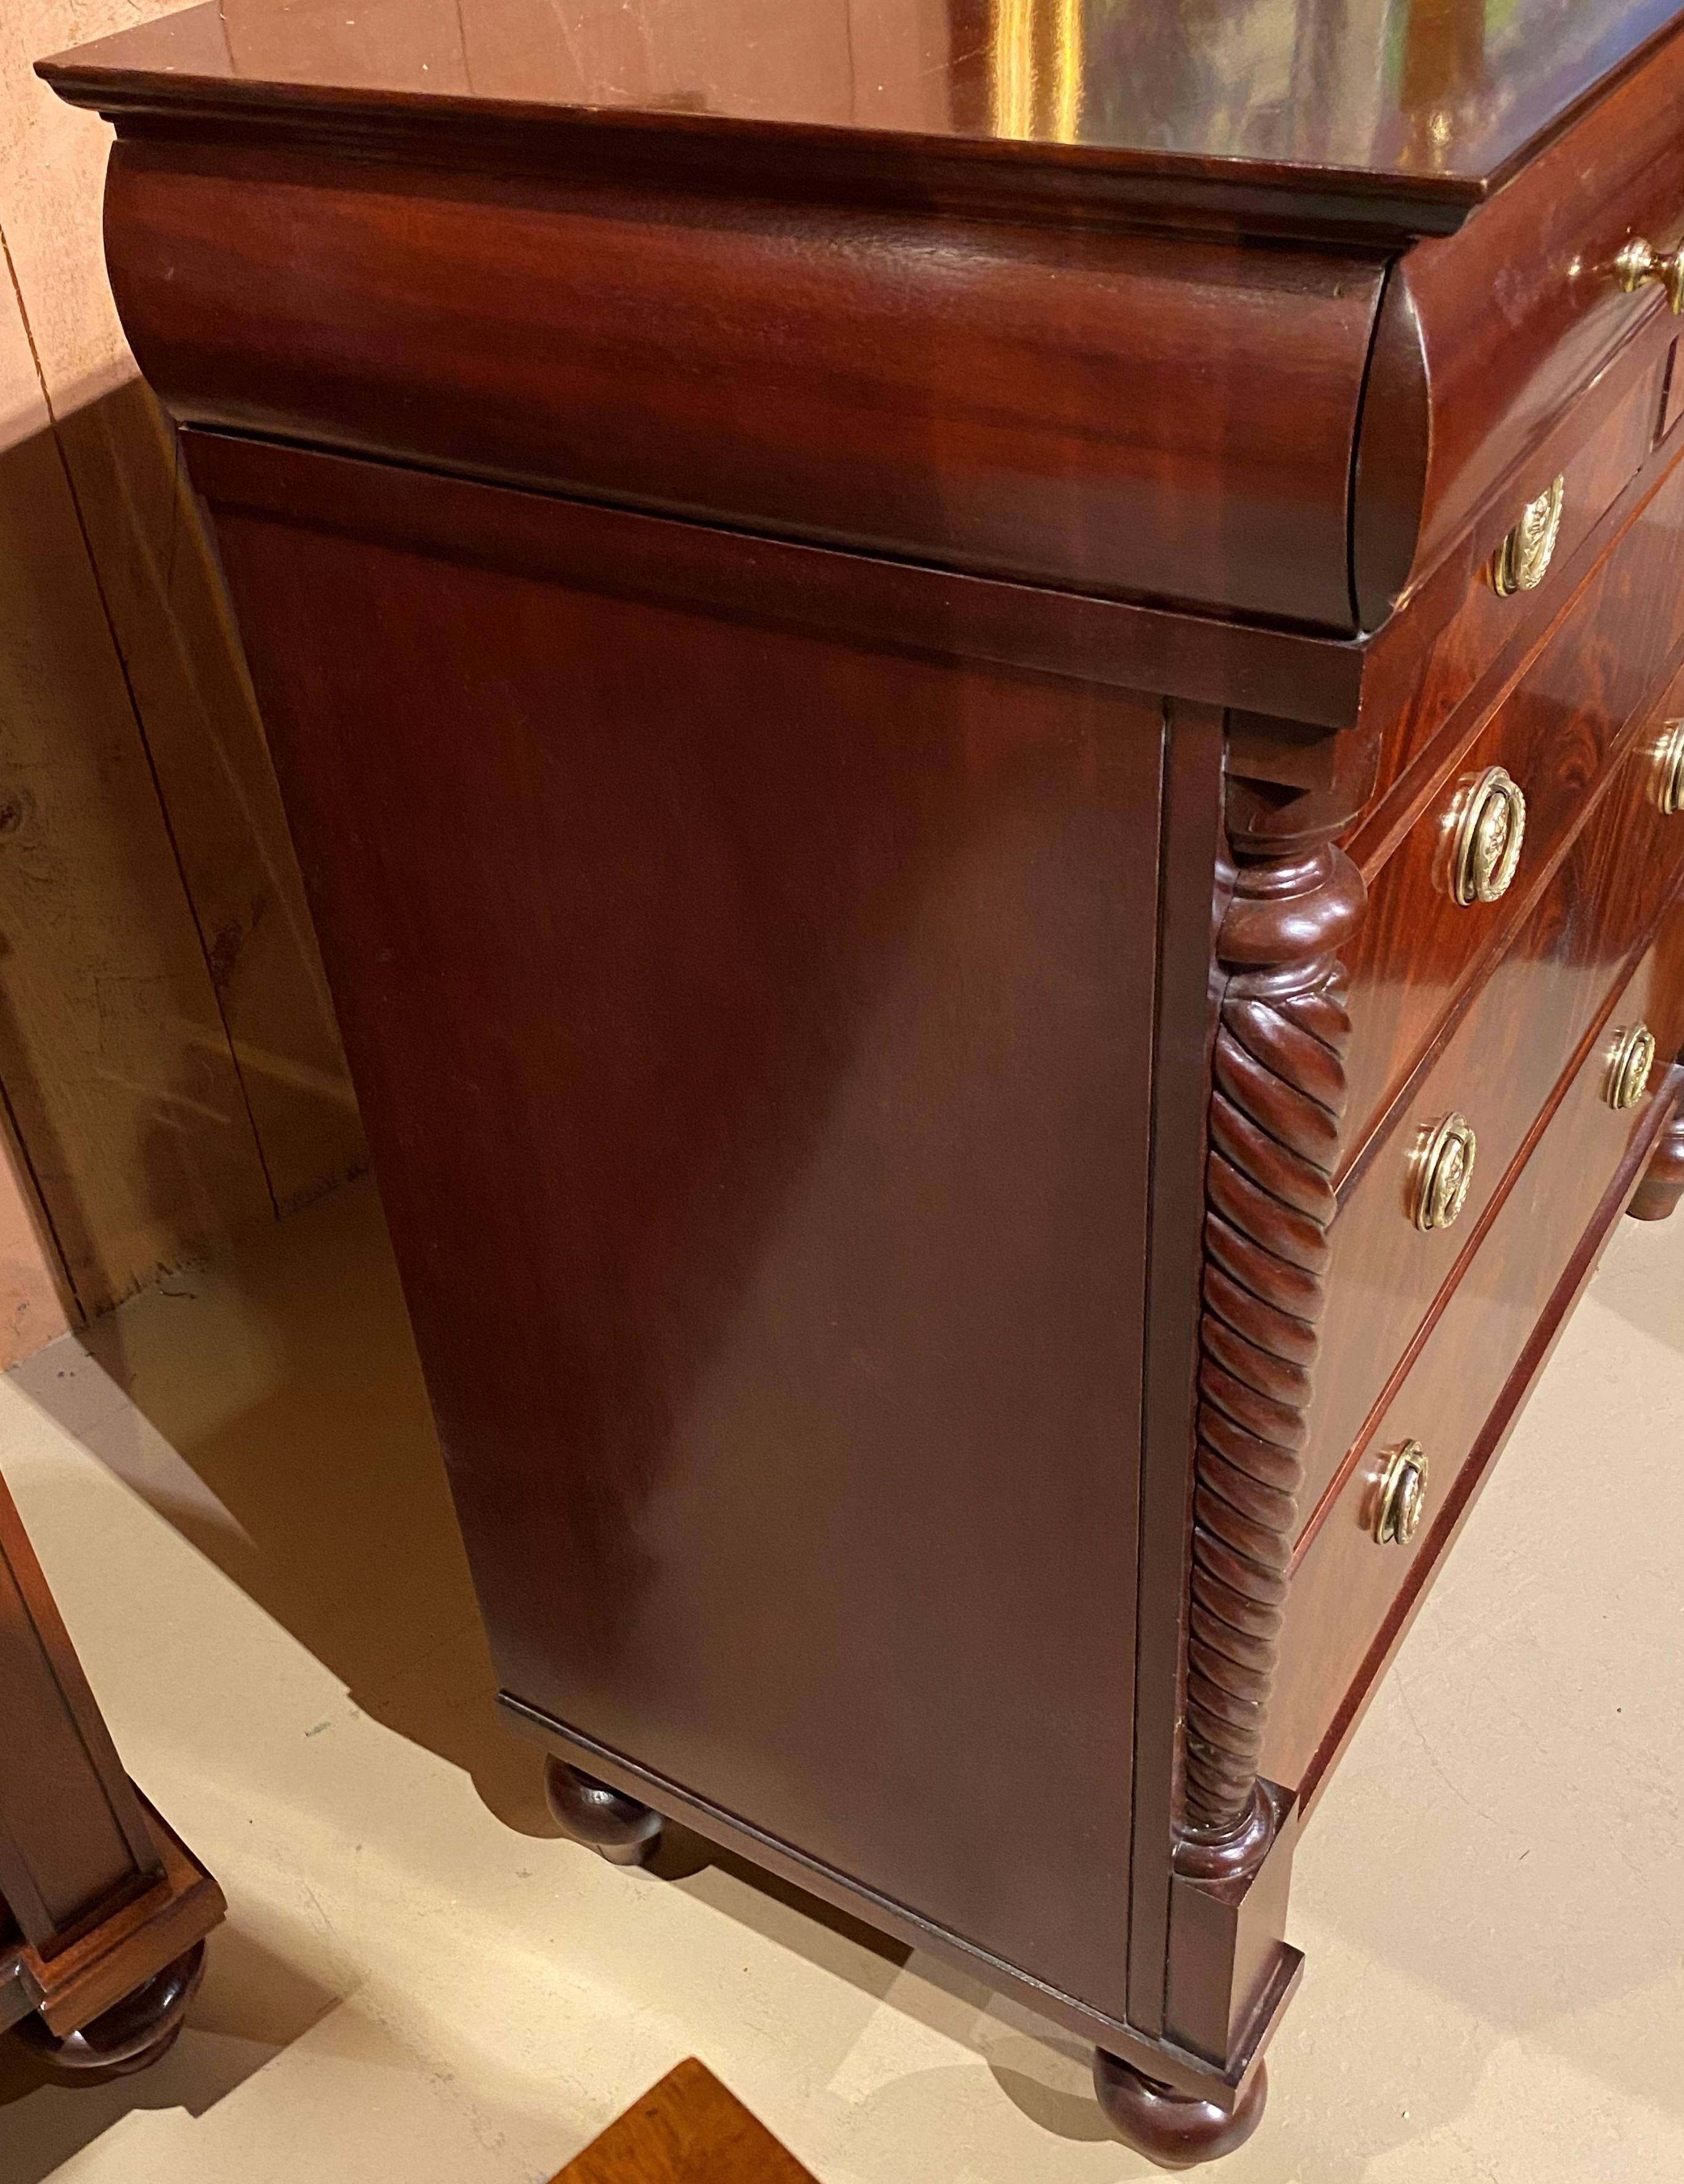 A finely constructed Empire style mahogany six drawer high chest by Hickory Chair, a fine furniture manufacturer since 1911 in Hickory, North Carolina. The chest features a rectangular top surmounting a single top drawer with a two over three